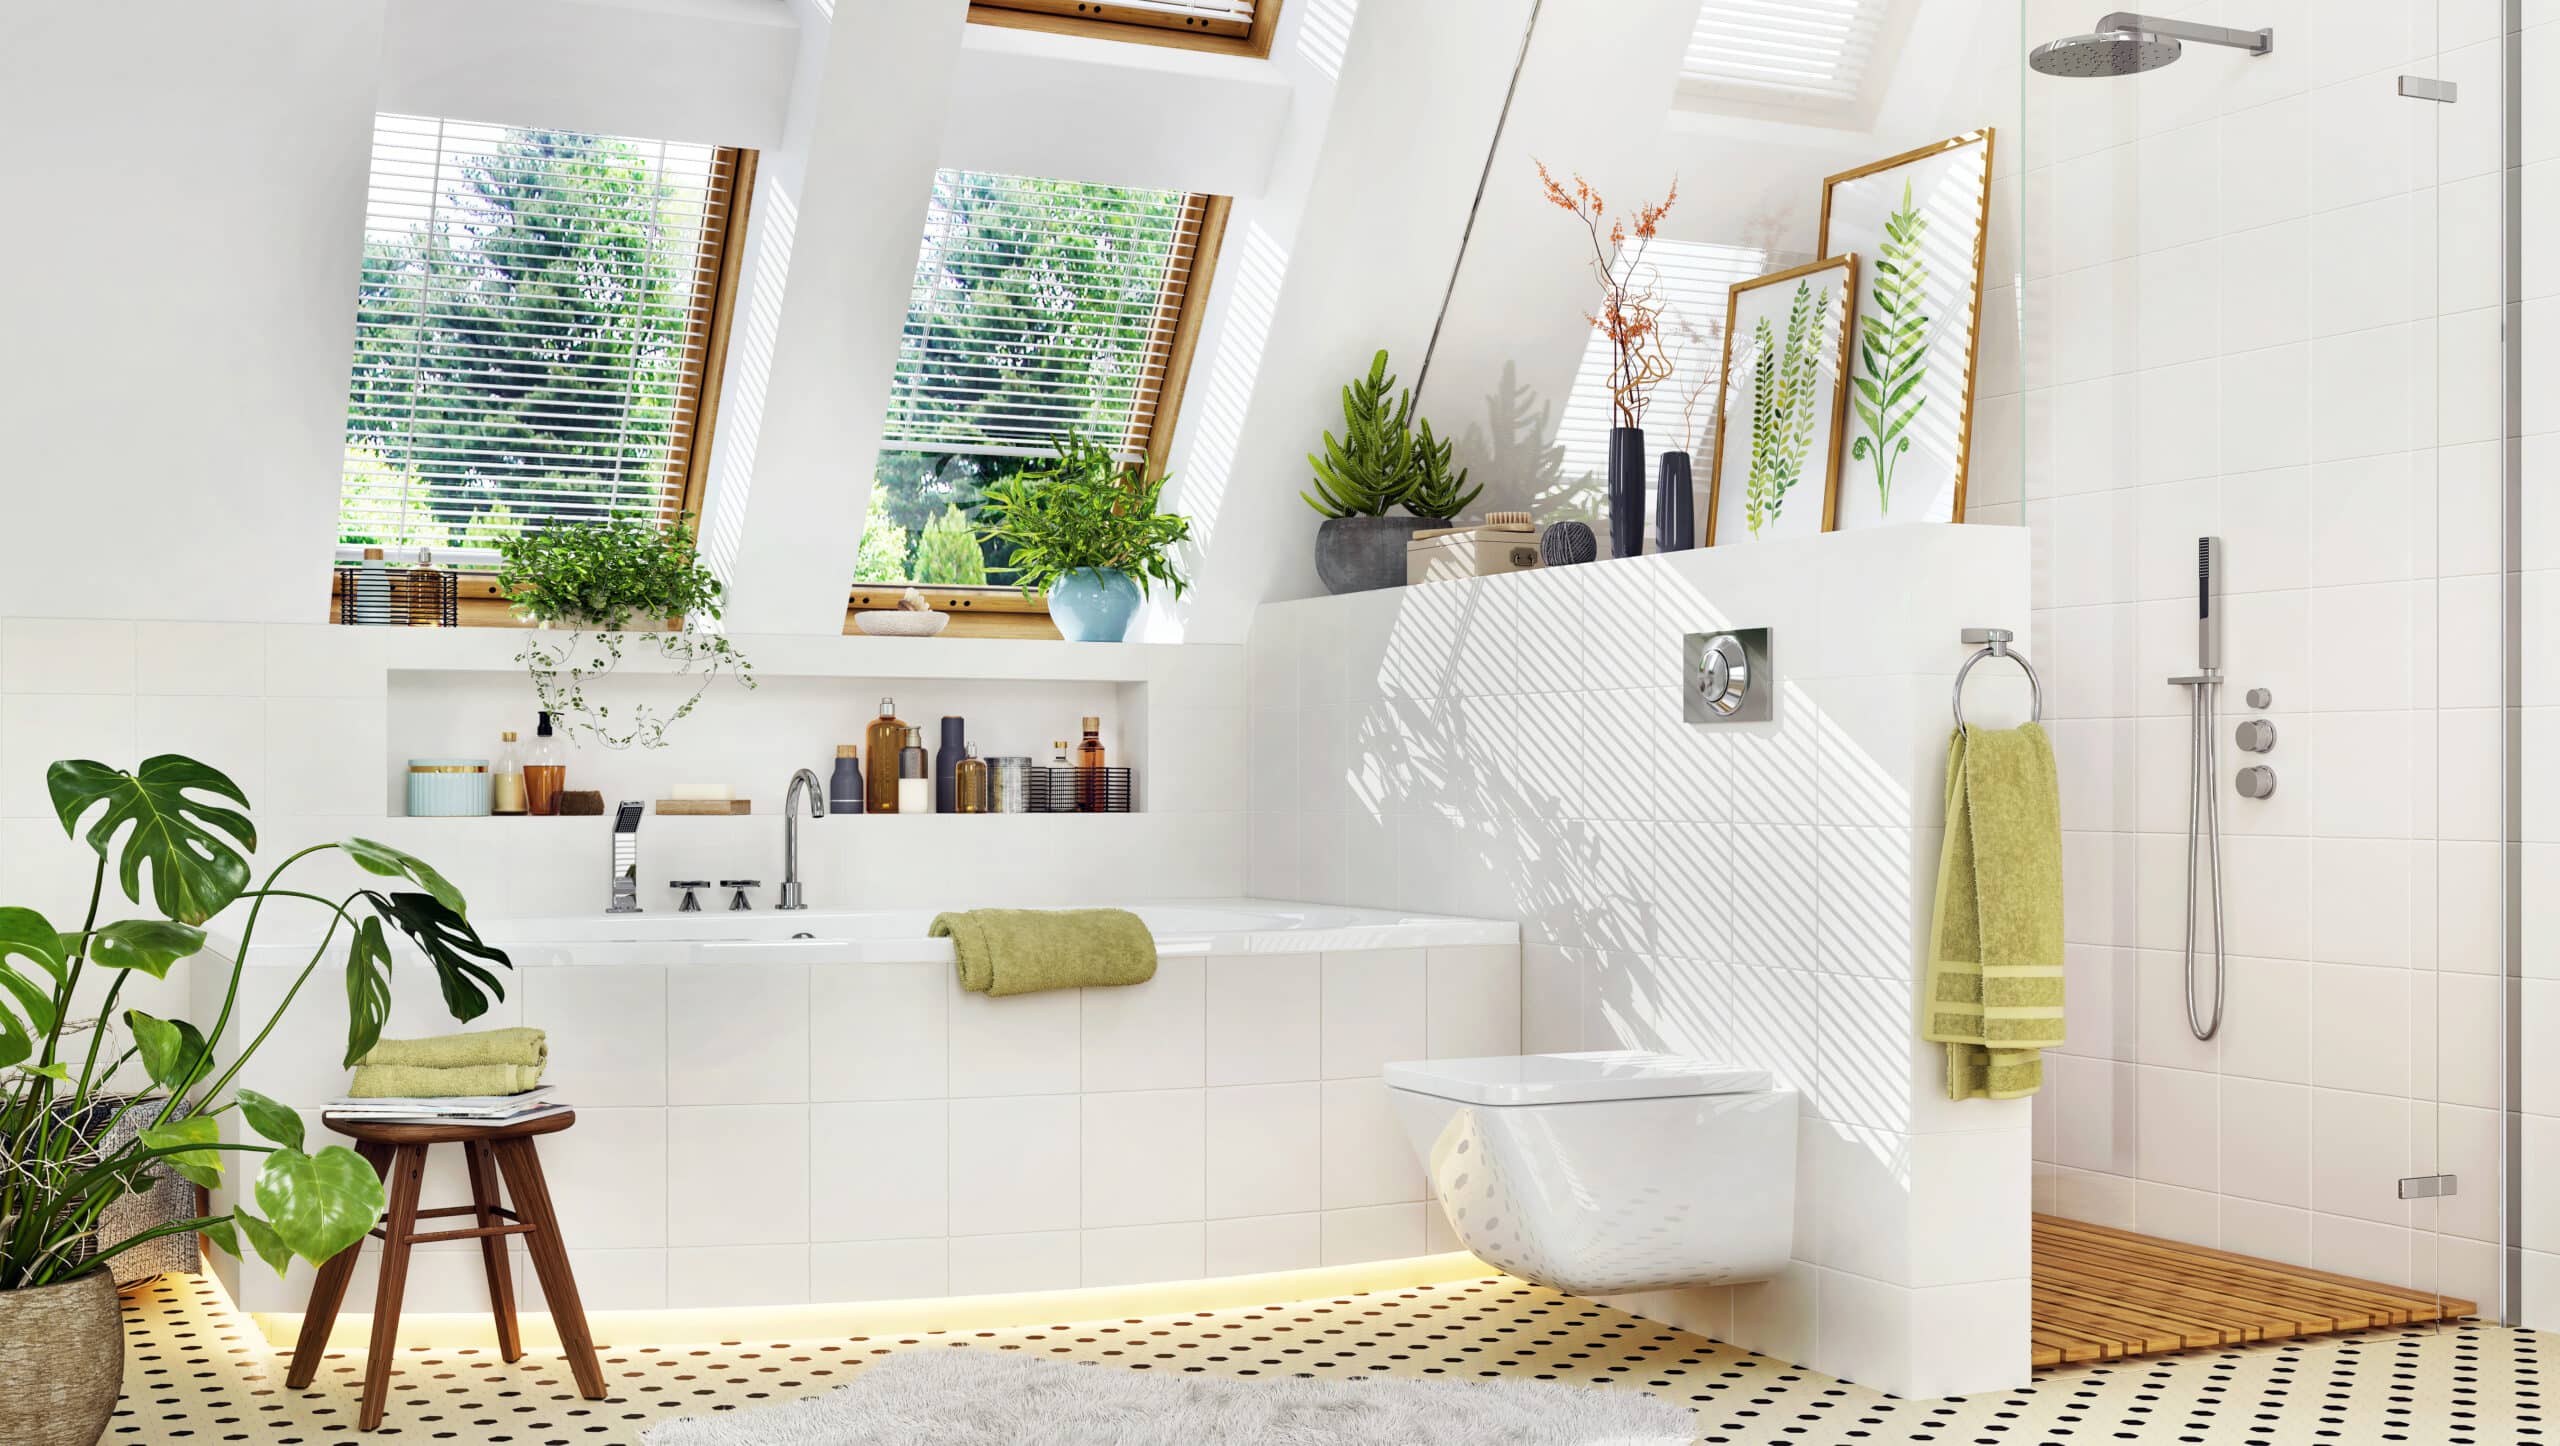 Mediterranean bathroom style with white vanity and floating toilet